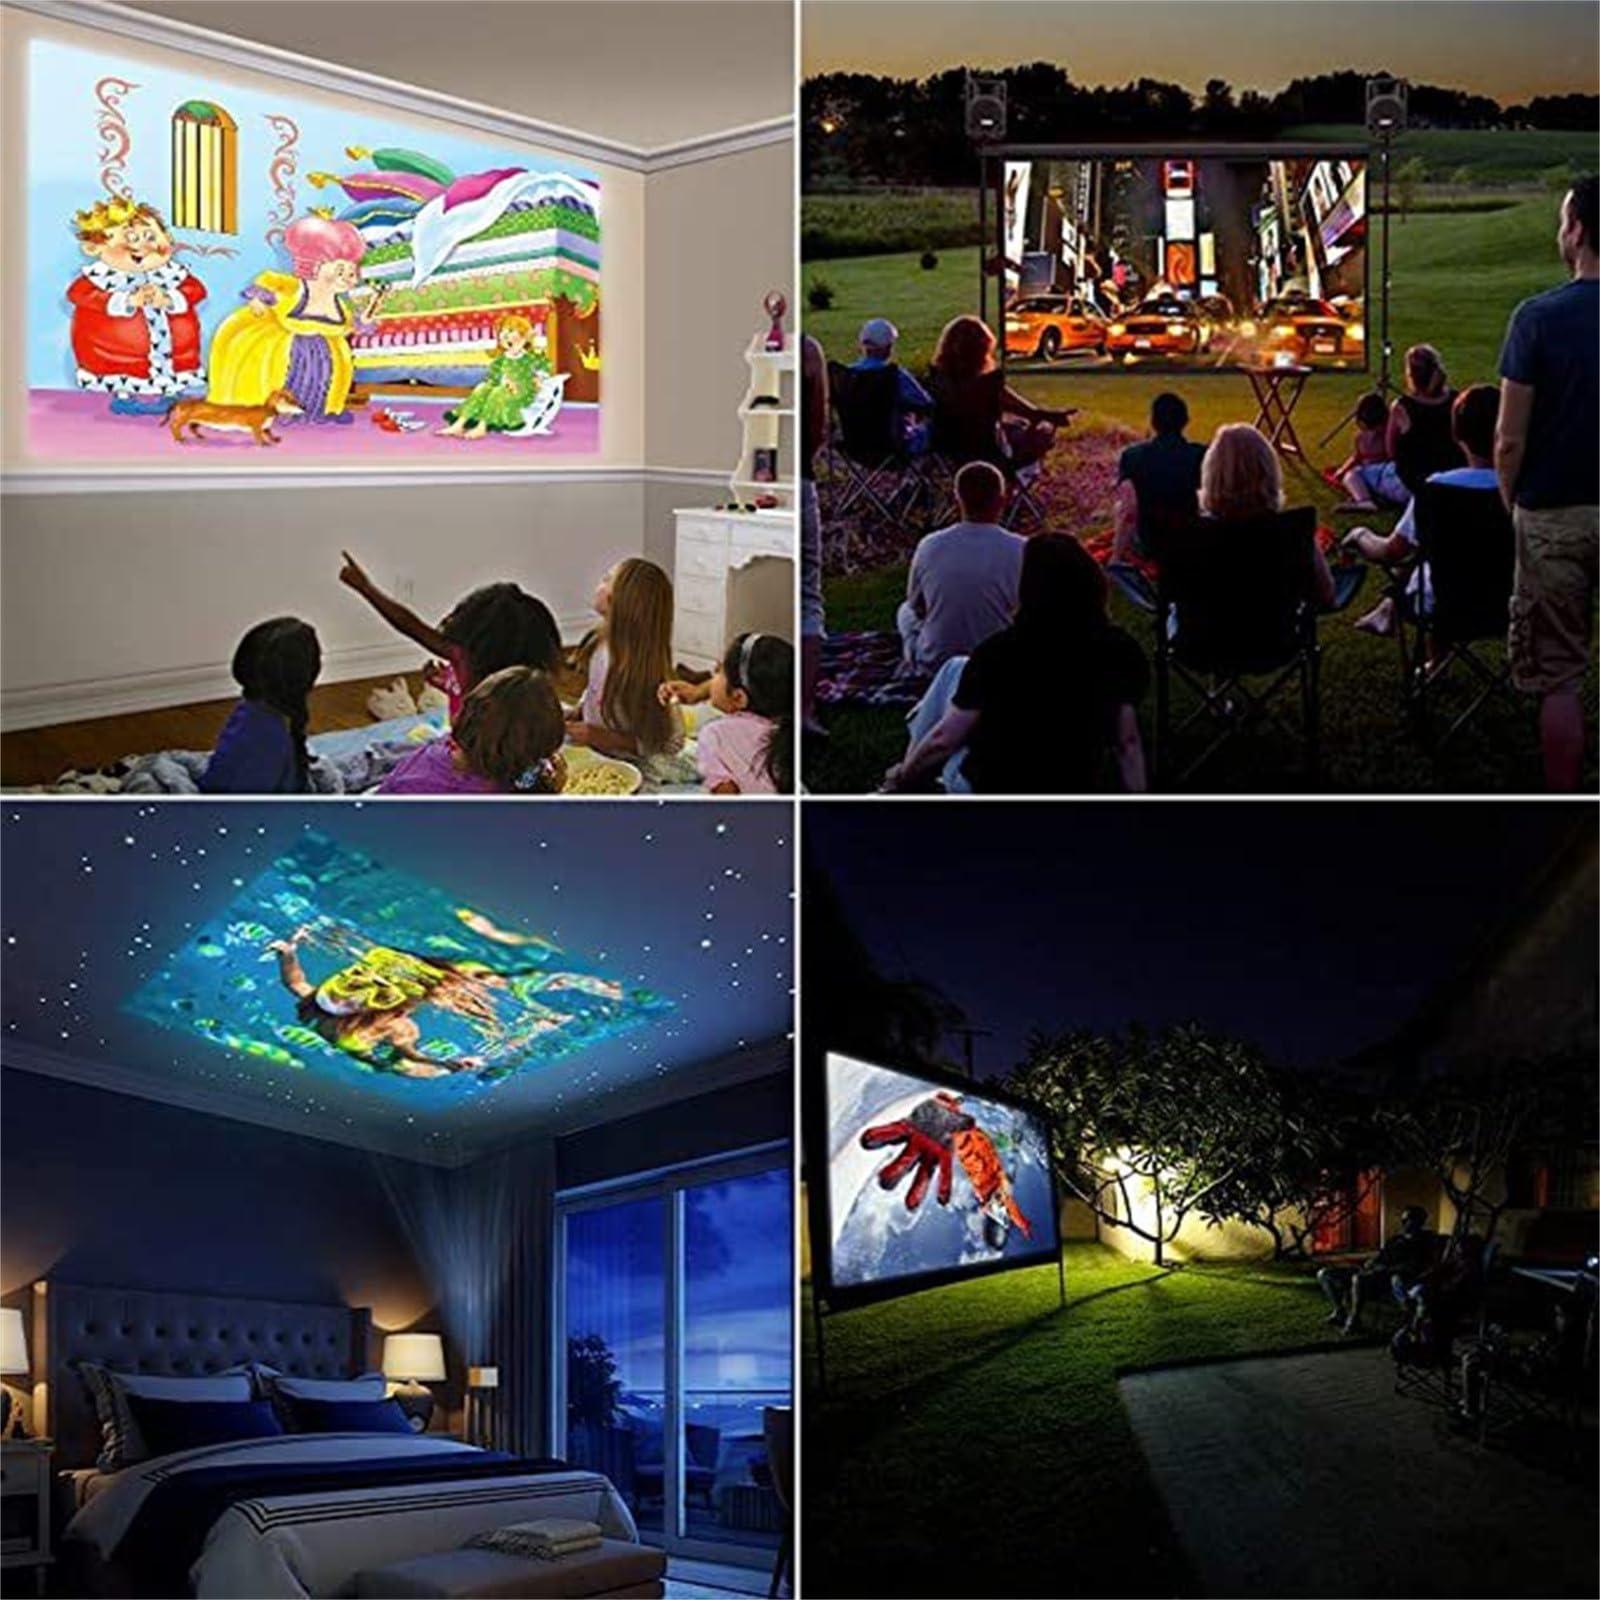 Portable 1080p Outdoor Movie Mini Projector - Home Movie LED Video Outdoor Movie Stereo Projector With USB HDMI Interface And Remote Control for Videos TV Dramas Photo Sharing